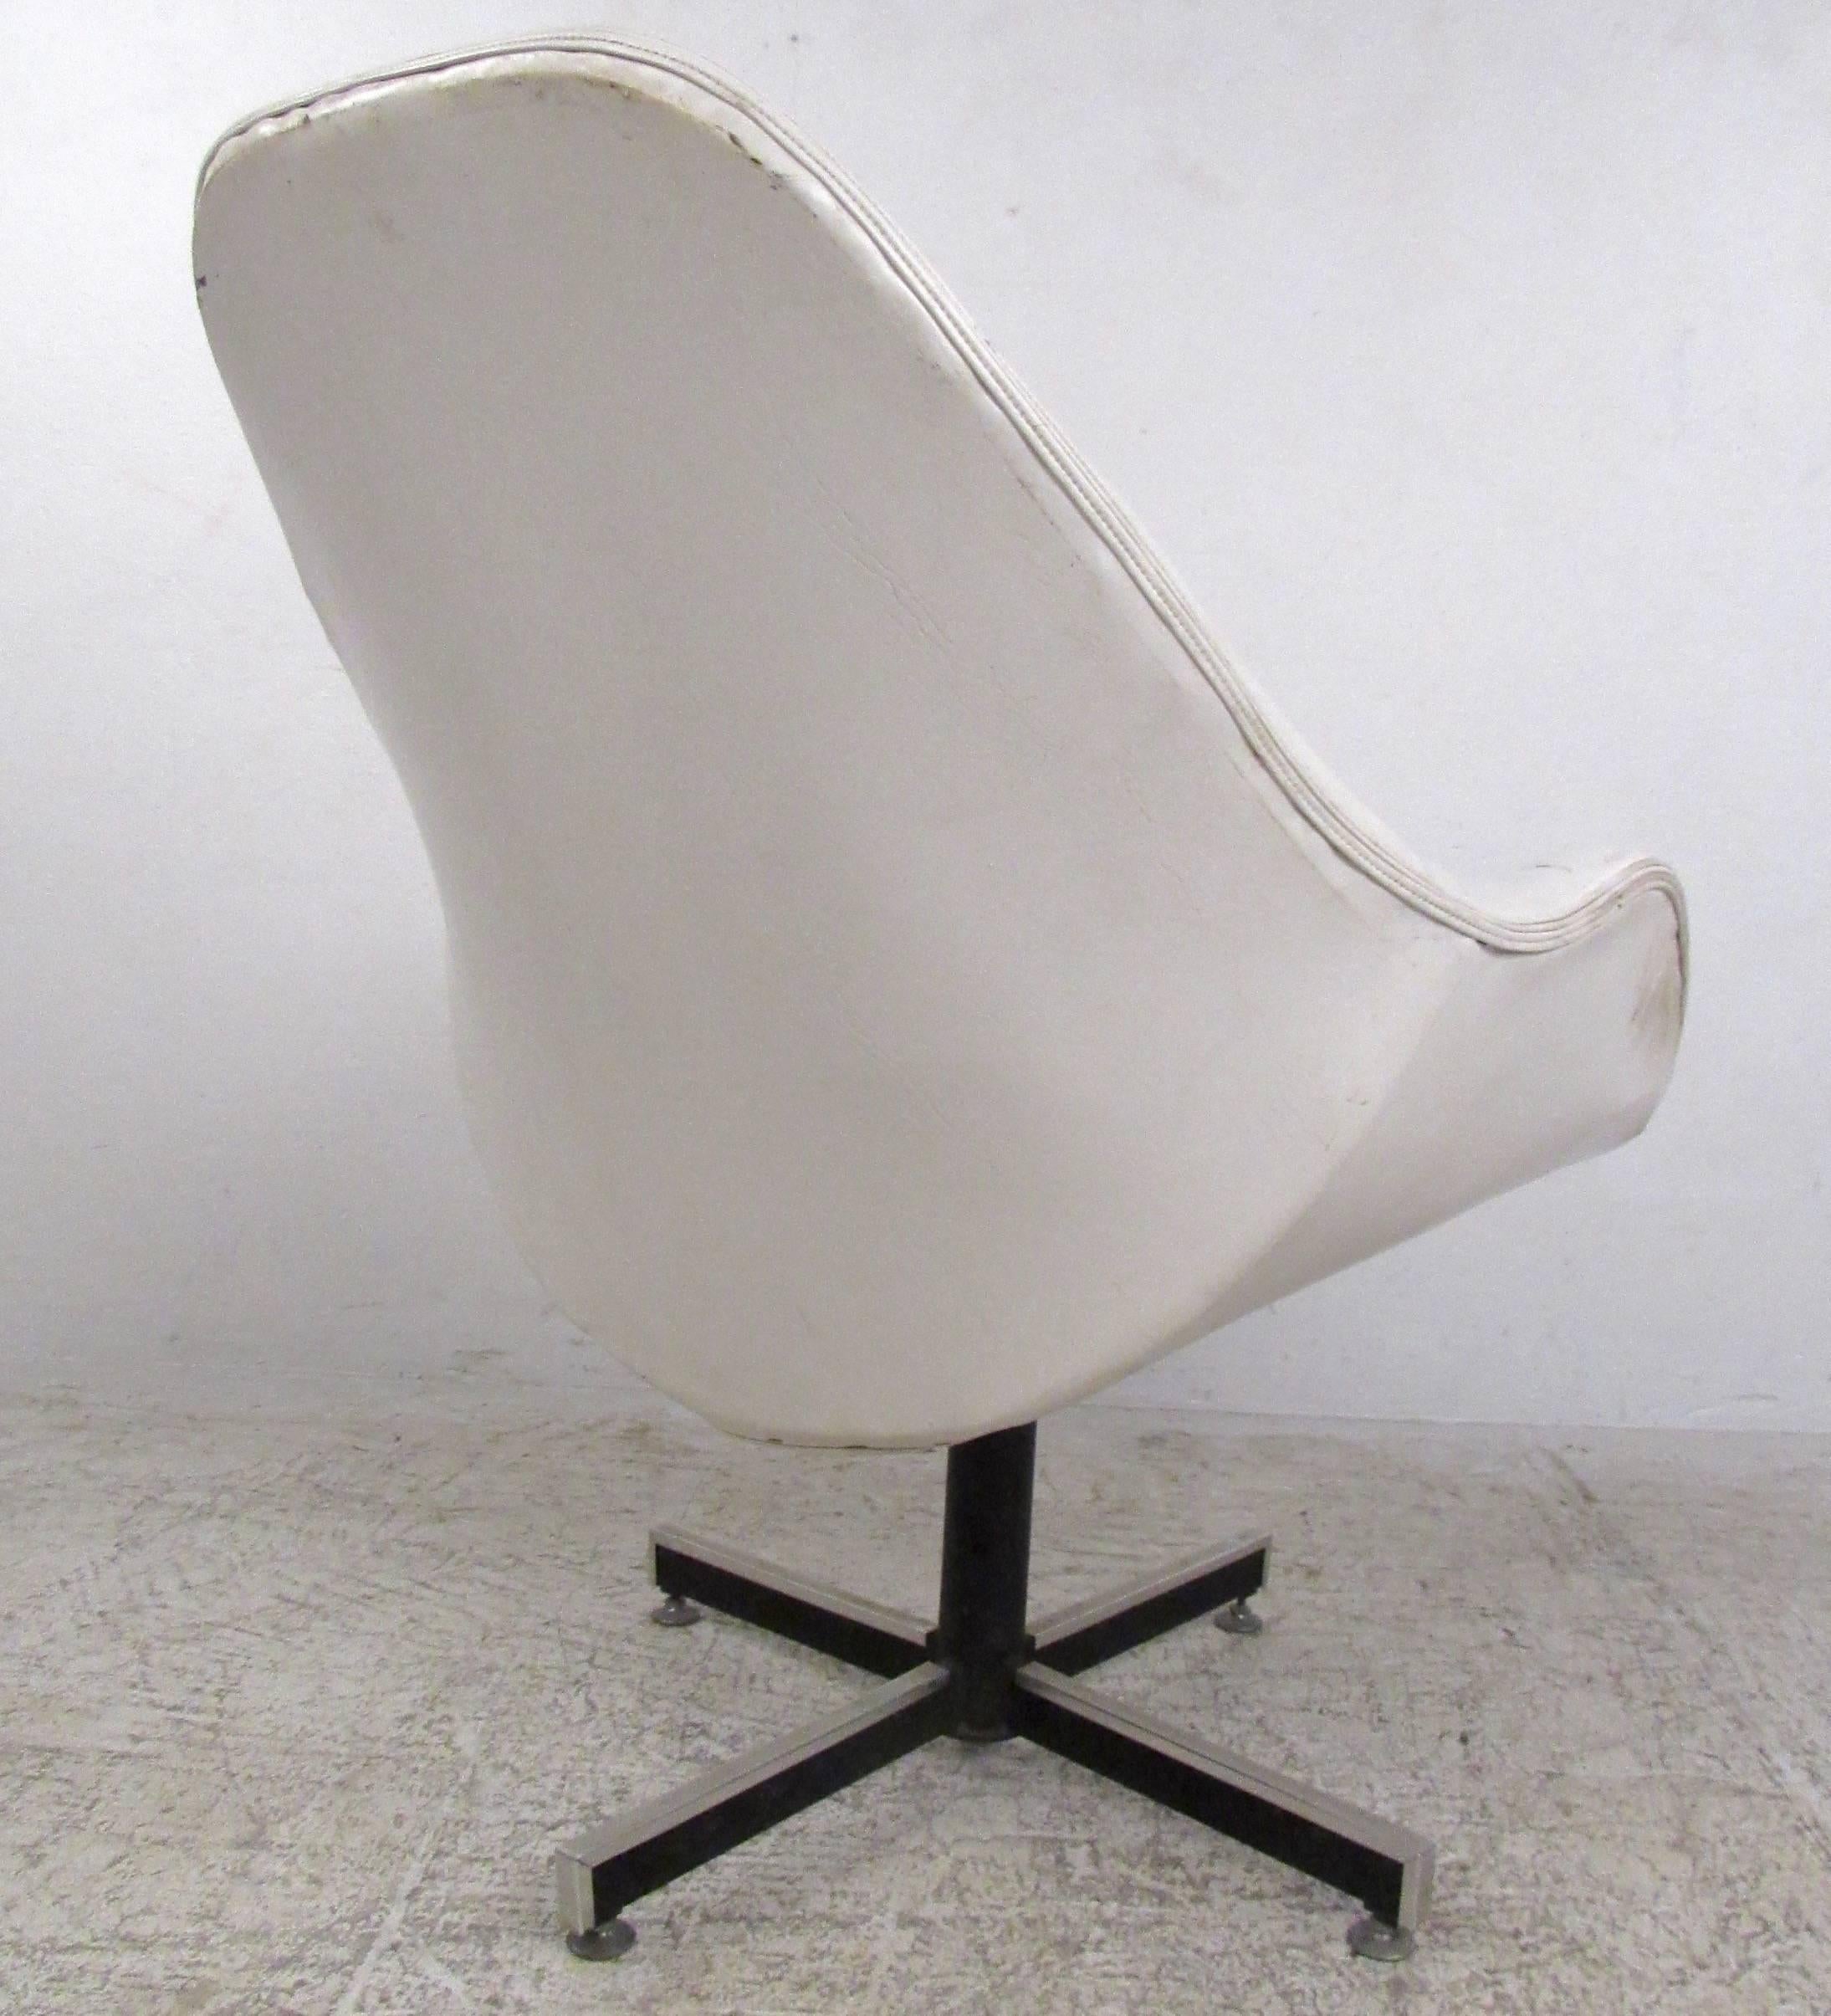 American Mid-Century Modern Tufted Swivel Lounge Chair For Sale